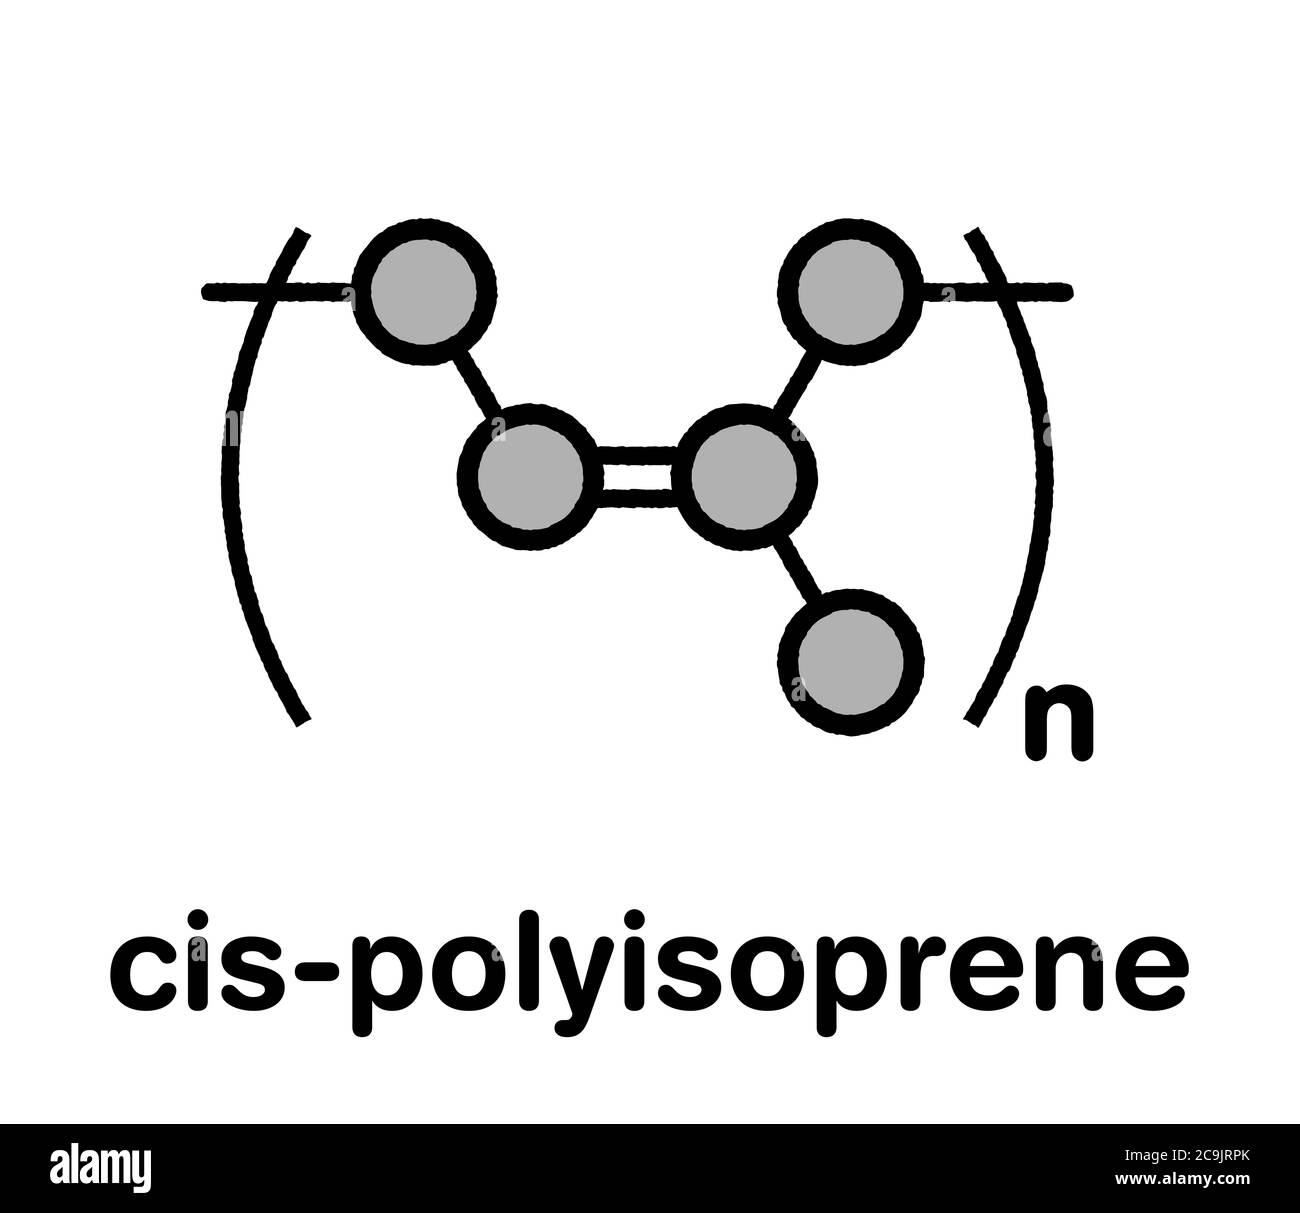 Natural rubber (cis-1,4-polyisoprene), chemical structure. Stylized  skeletal formula: Atoms are shown as color-coded circles with thick black  outlines Stock Photo - Alamy